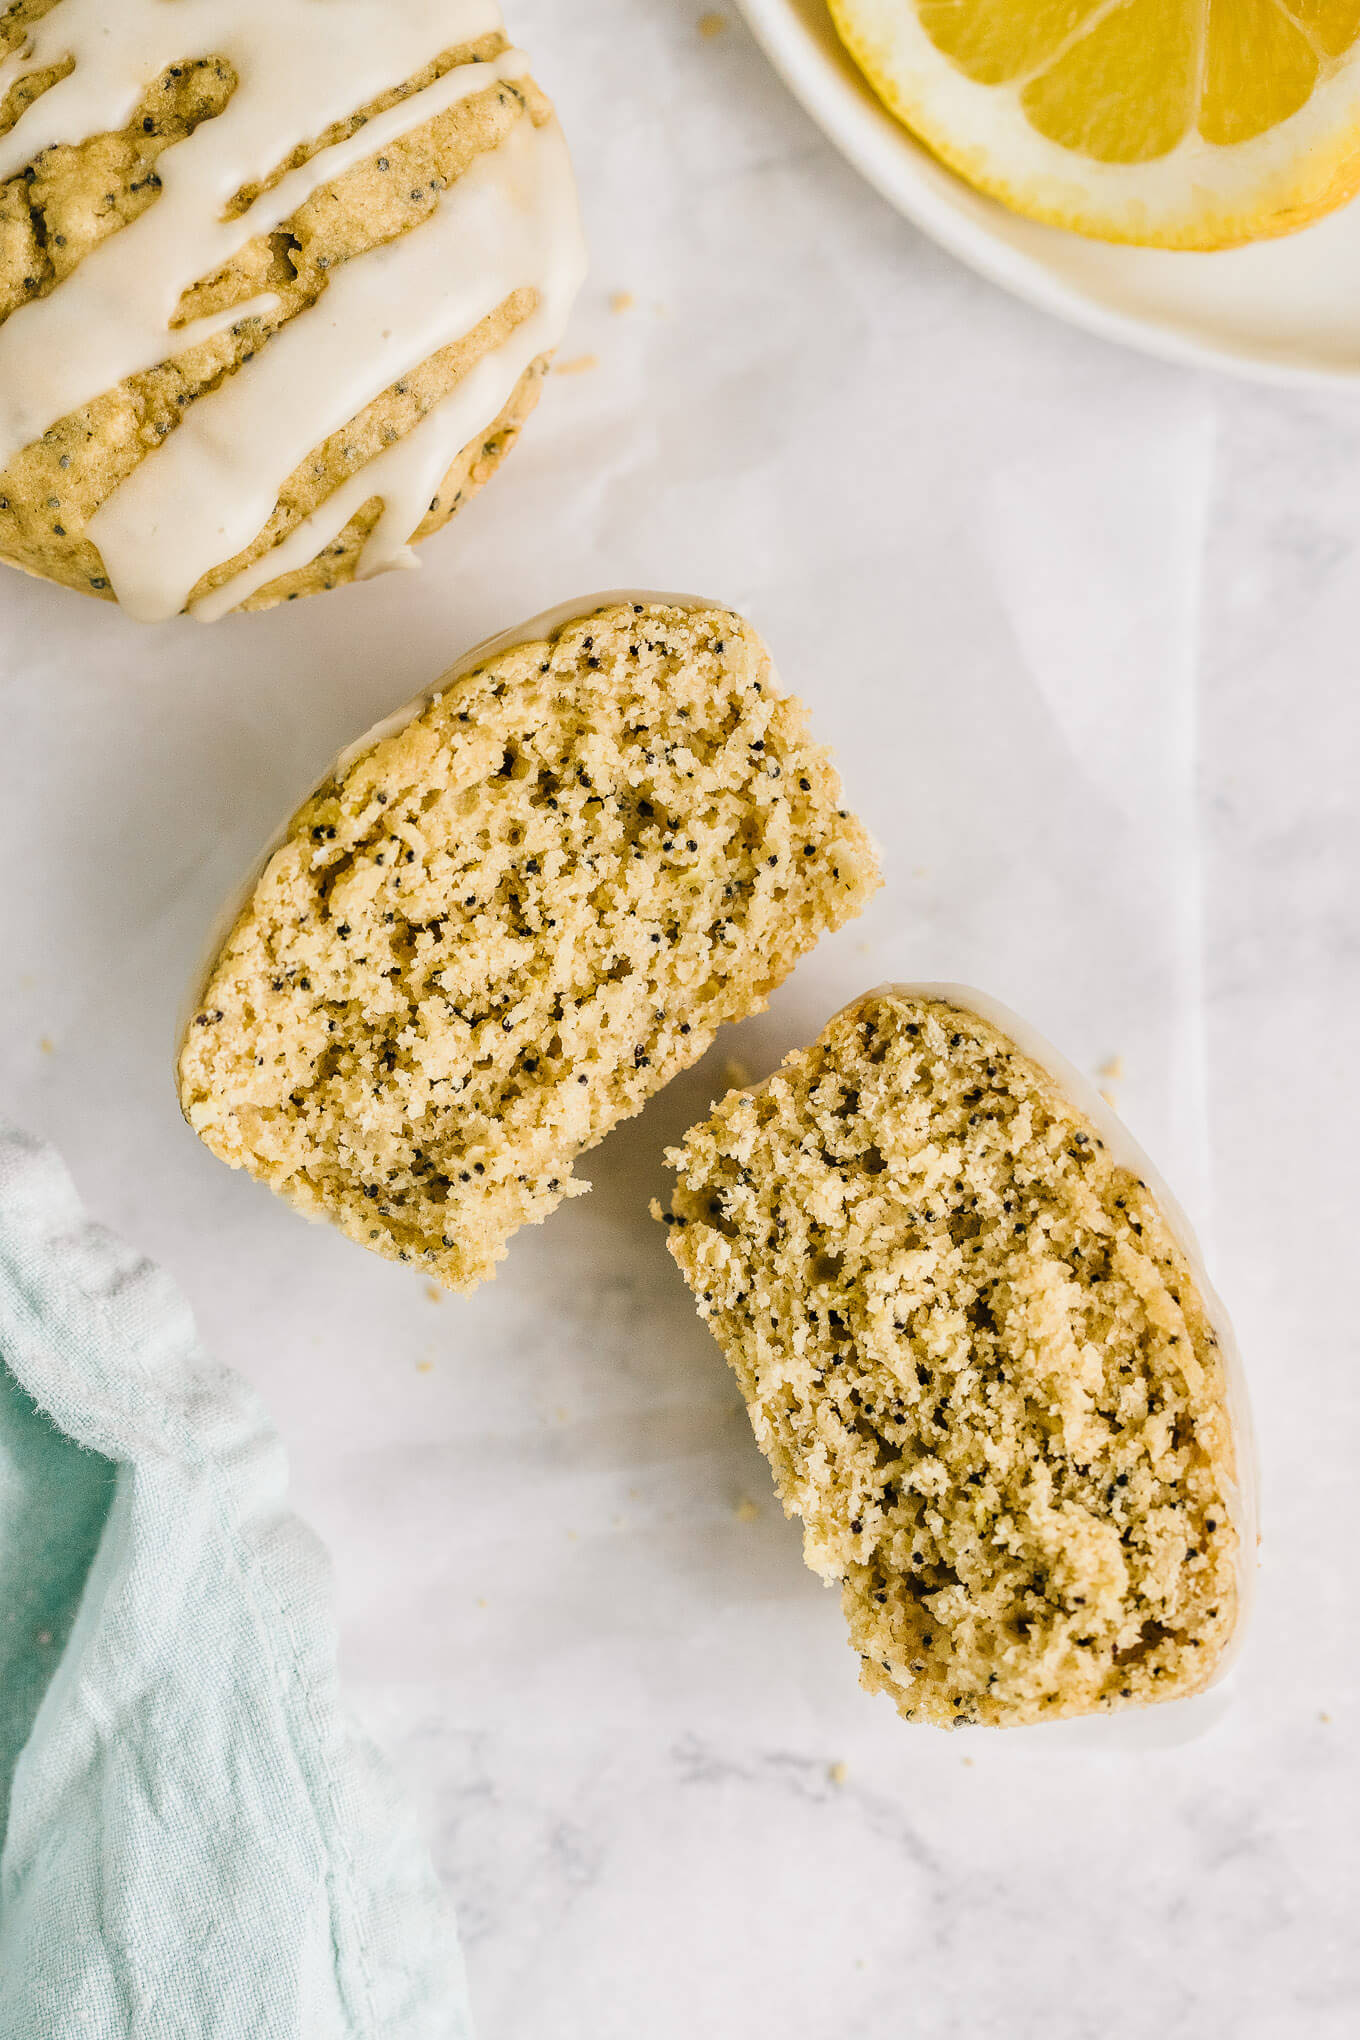 inside of Healthy lemon poppy seed muffins with glaze